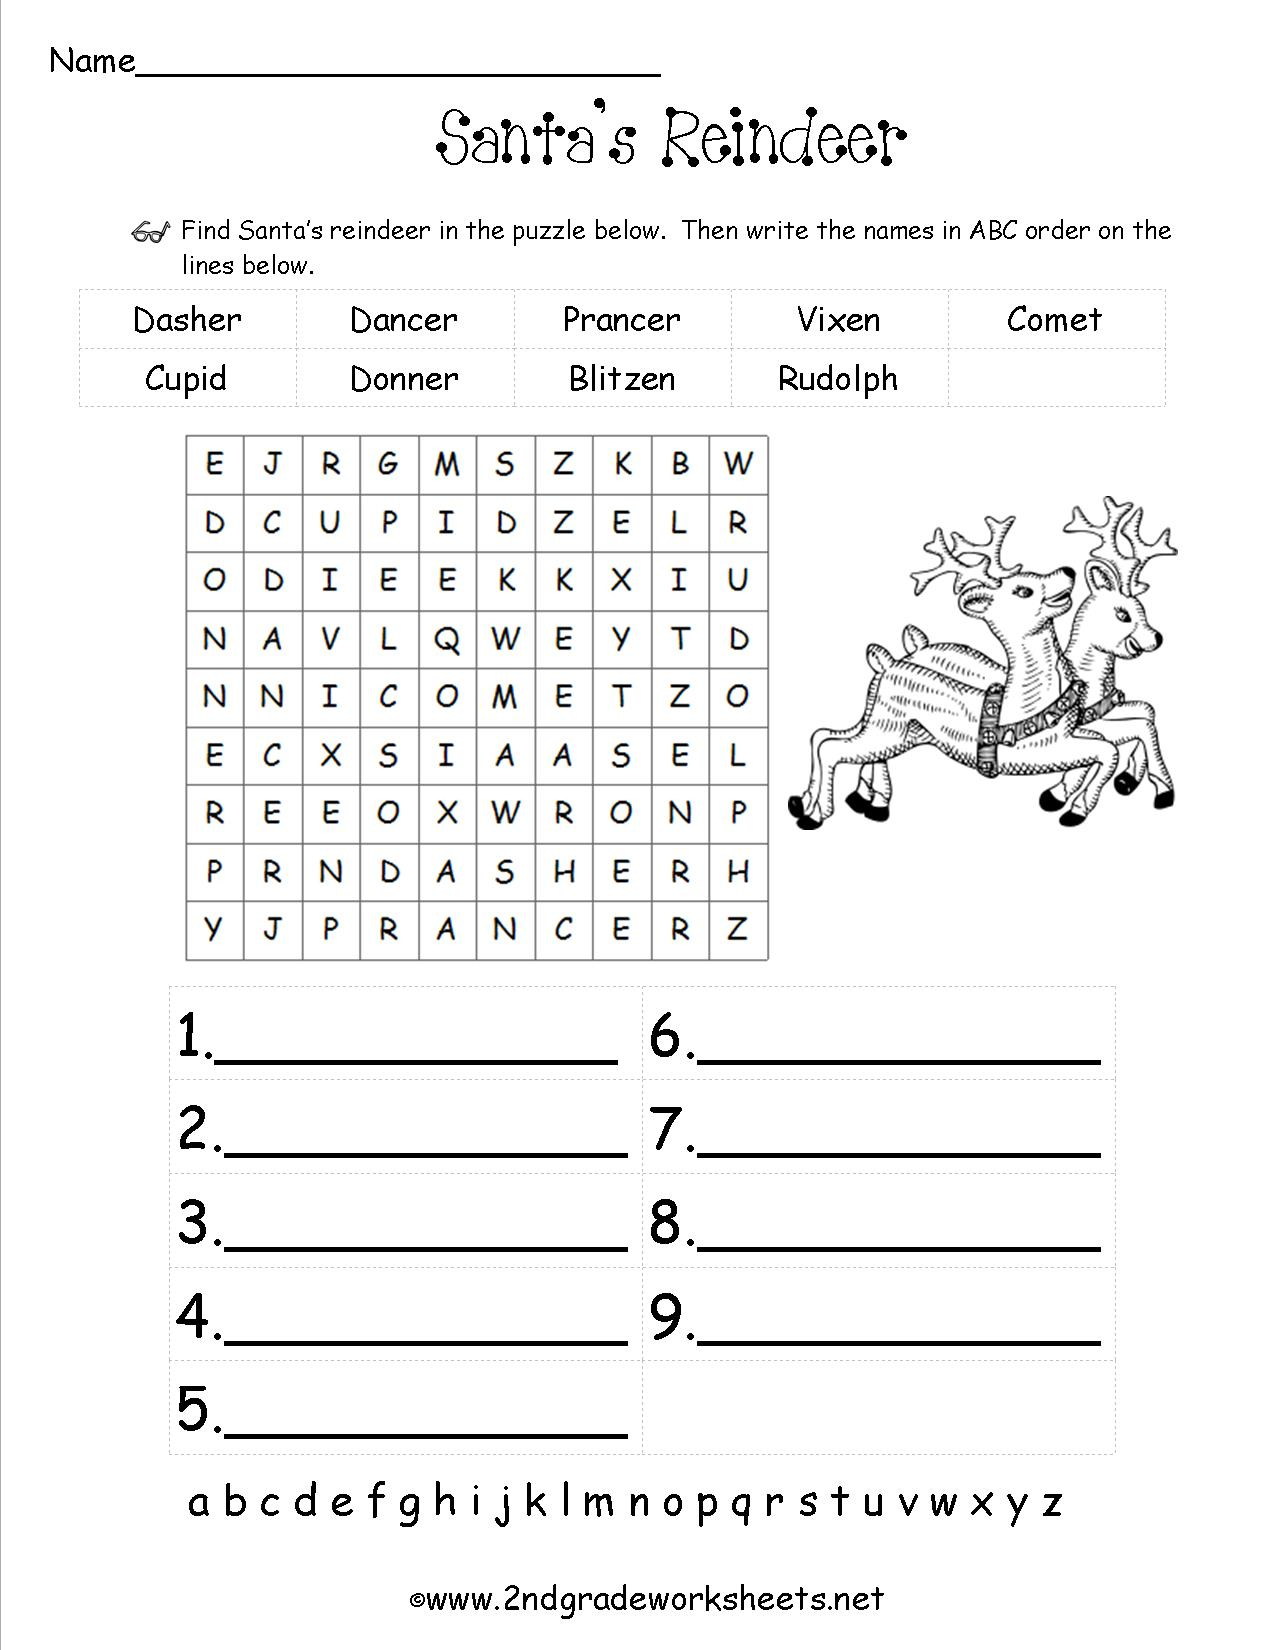 Christmas Worksheets And Printouts - Free Printable Activity Sheets For 2Nd Grade